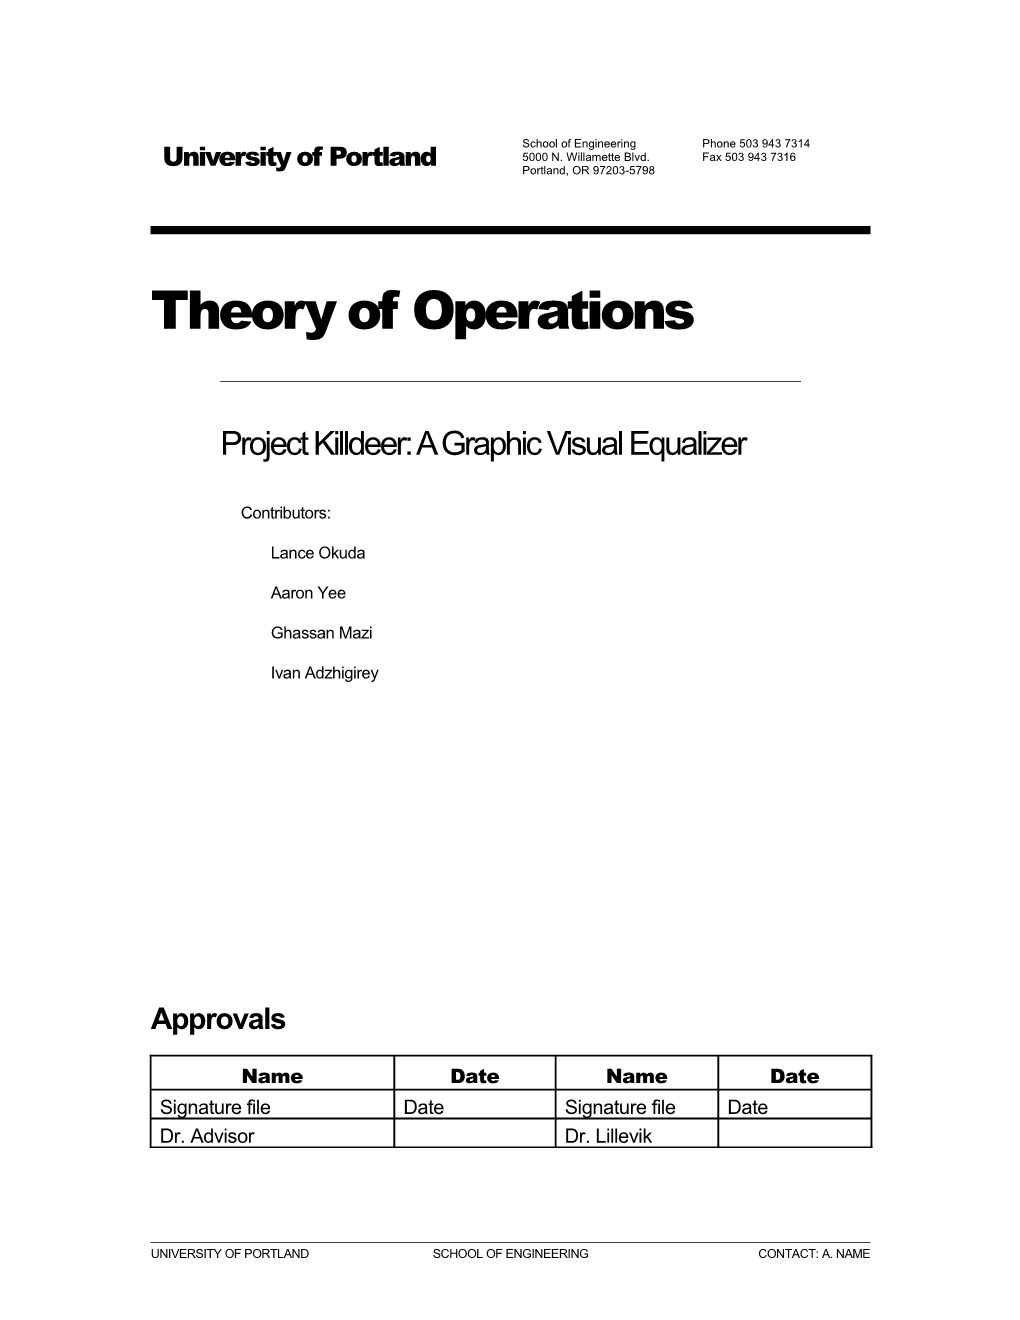 Theory of Operations s1